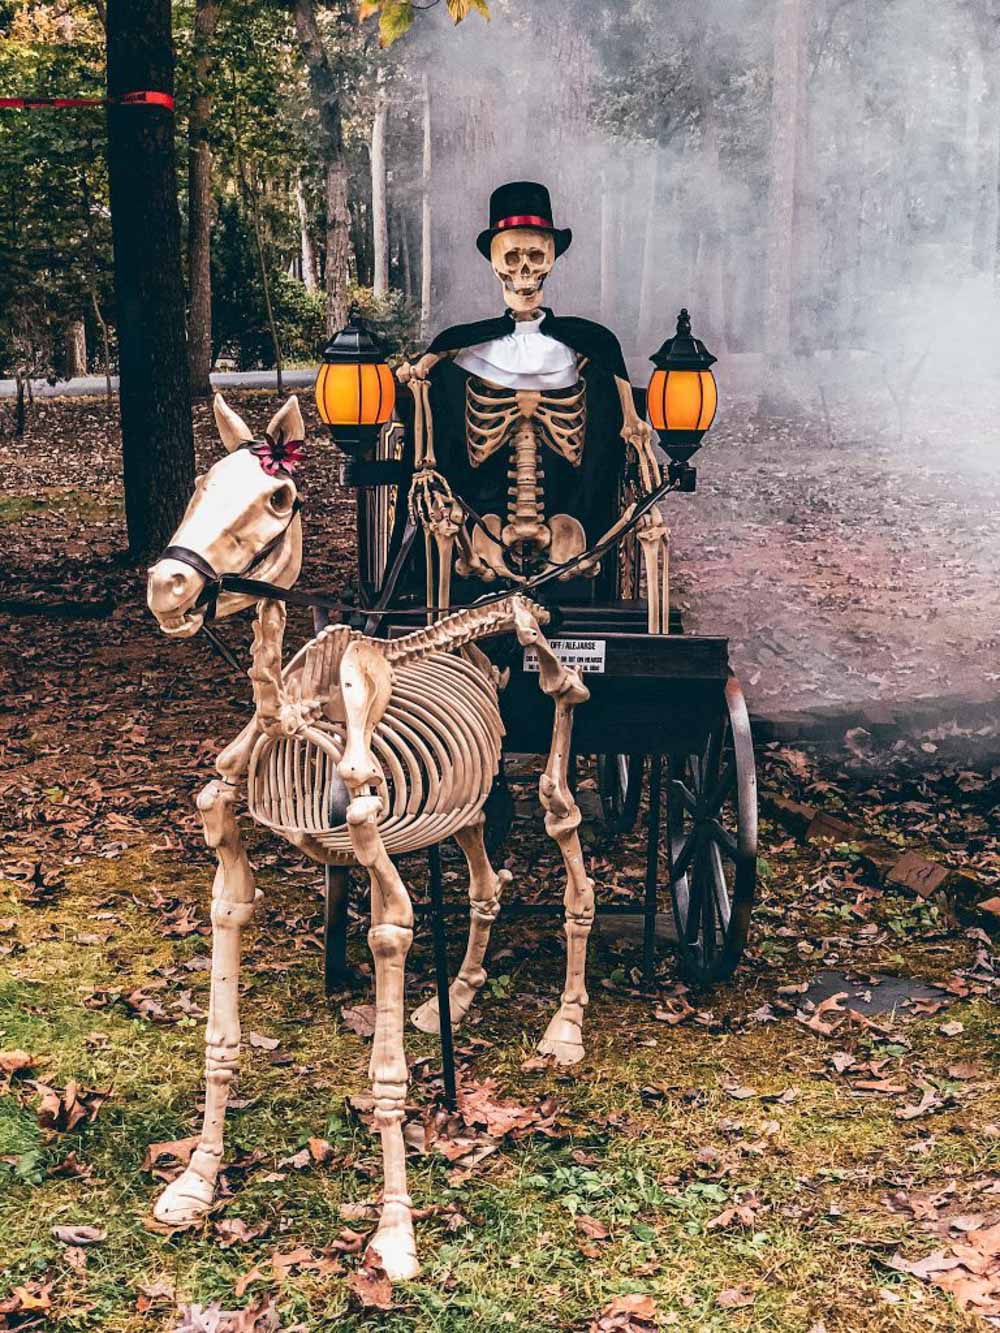 A skeleton driving a haunted hearse with a skeleton pony.